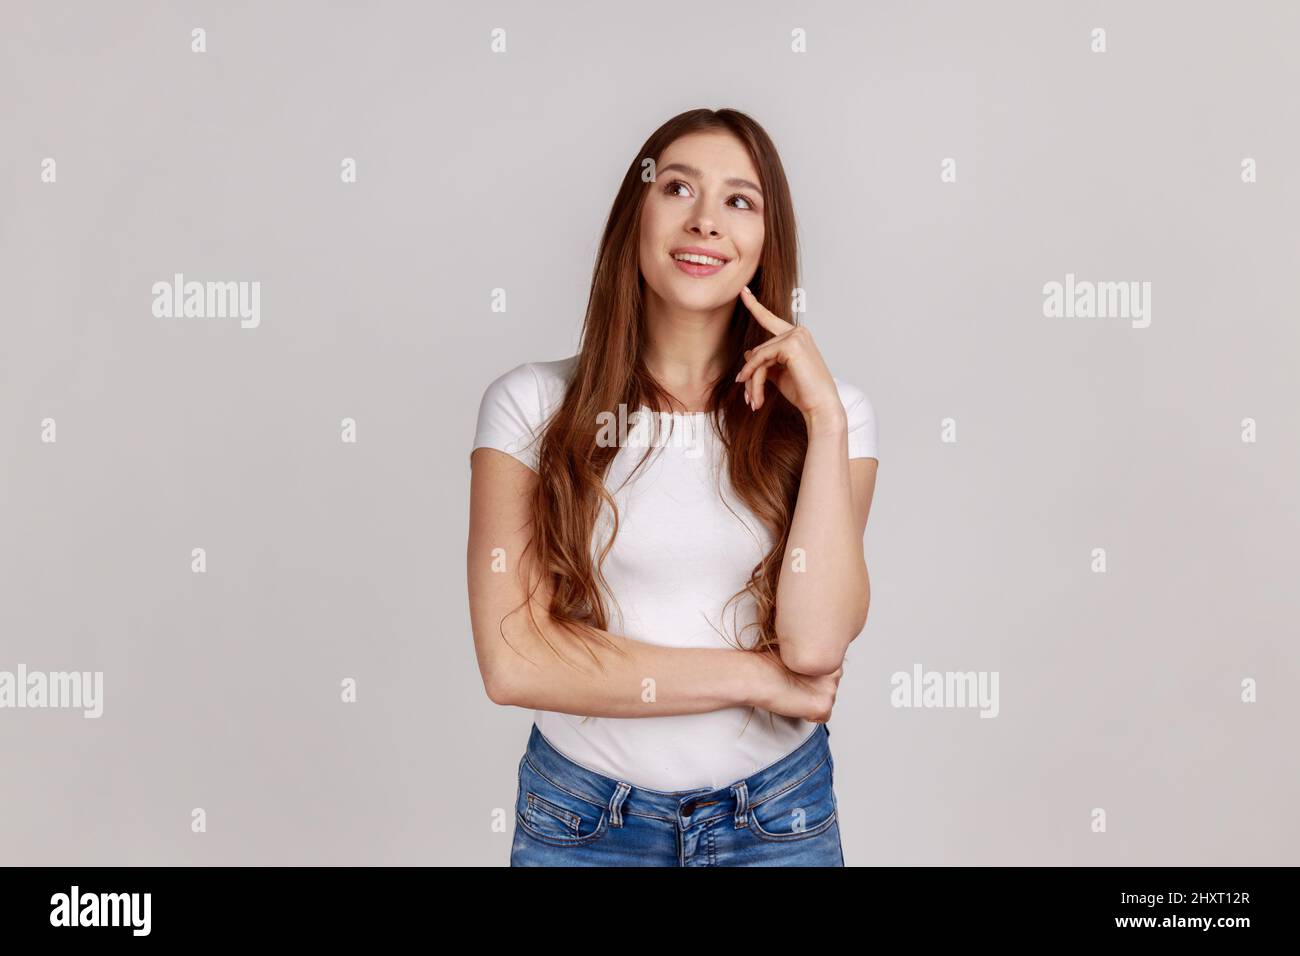 Portrait of adorable dreamy woman standing looking away, keeping finger on cheek, dreaming, making wish, love, wearing white T-shirt. Indoor studio shot isolated on gray background. Stock Photo